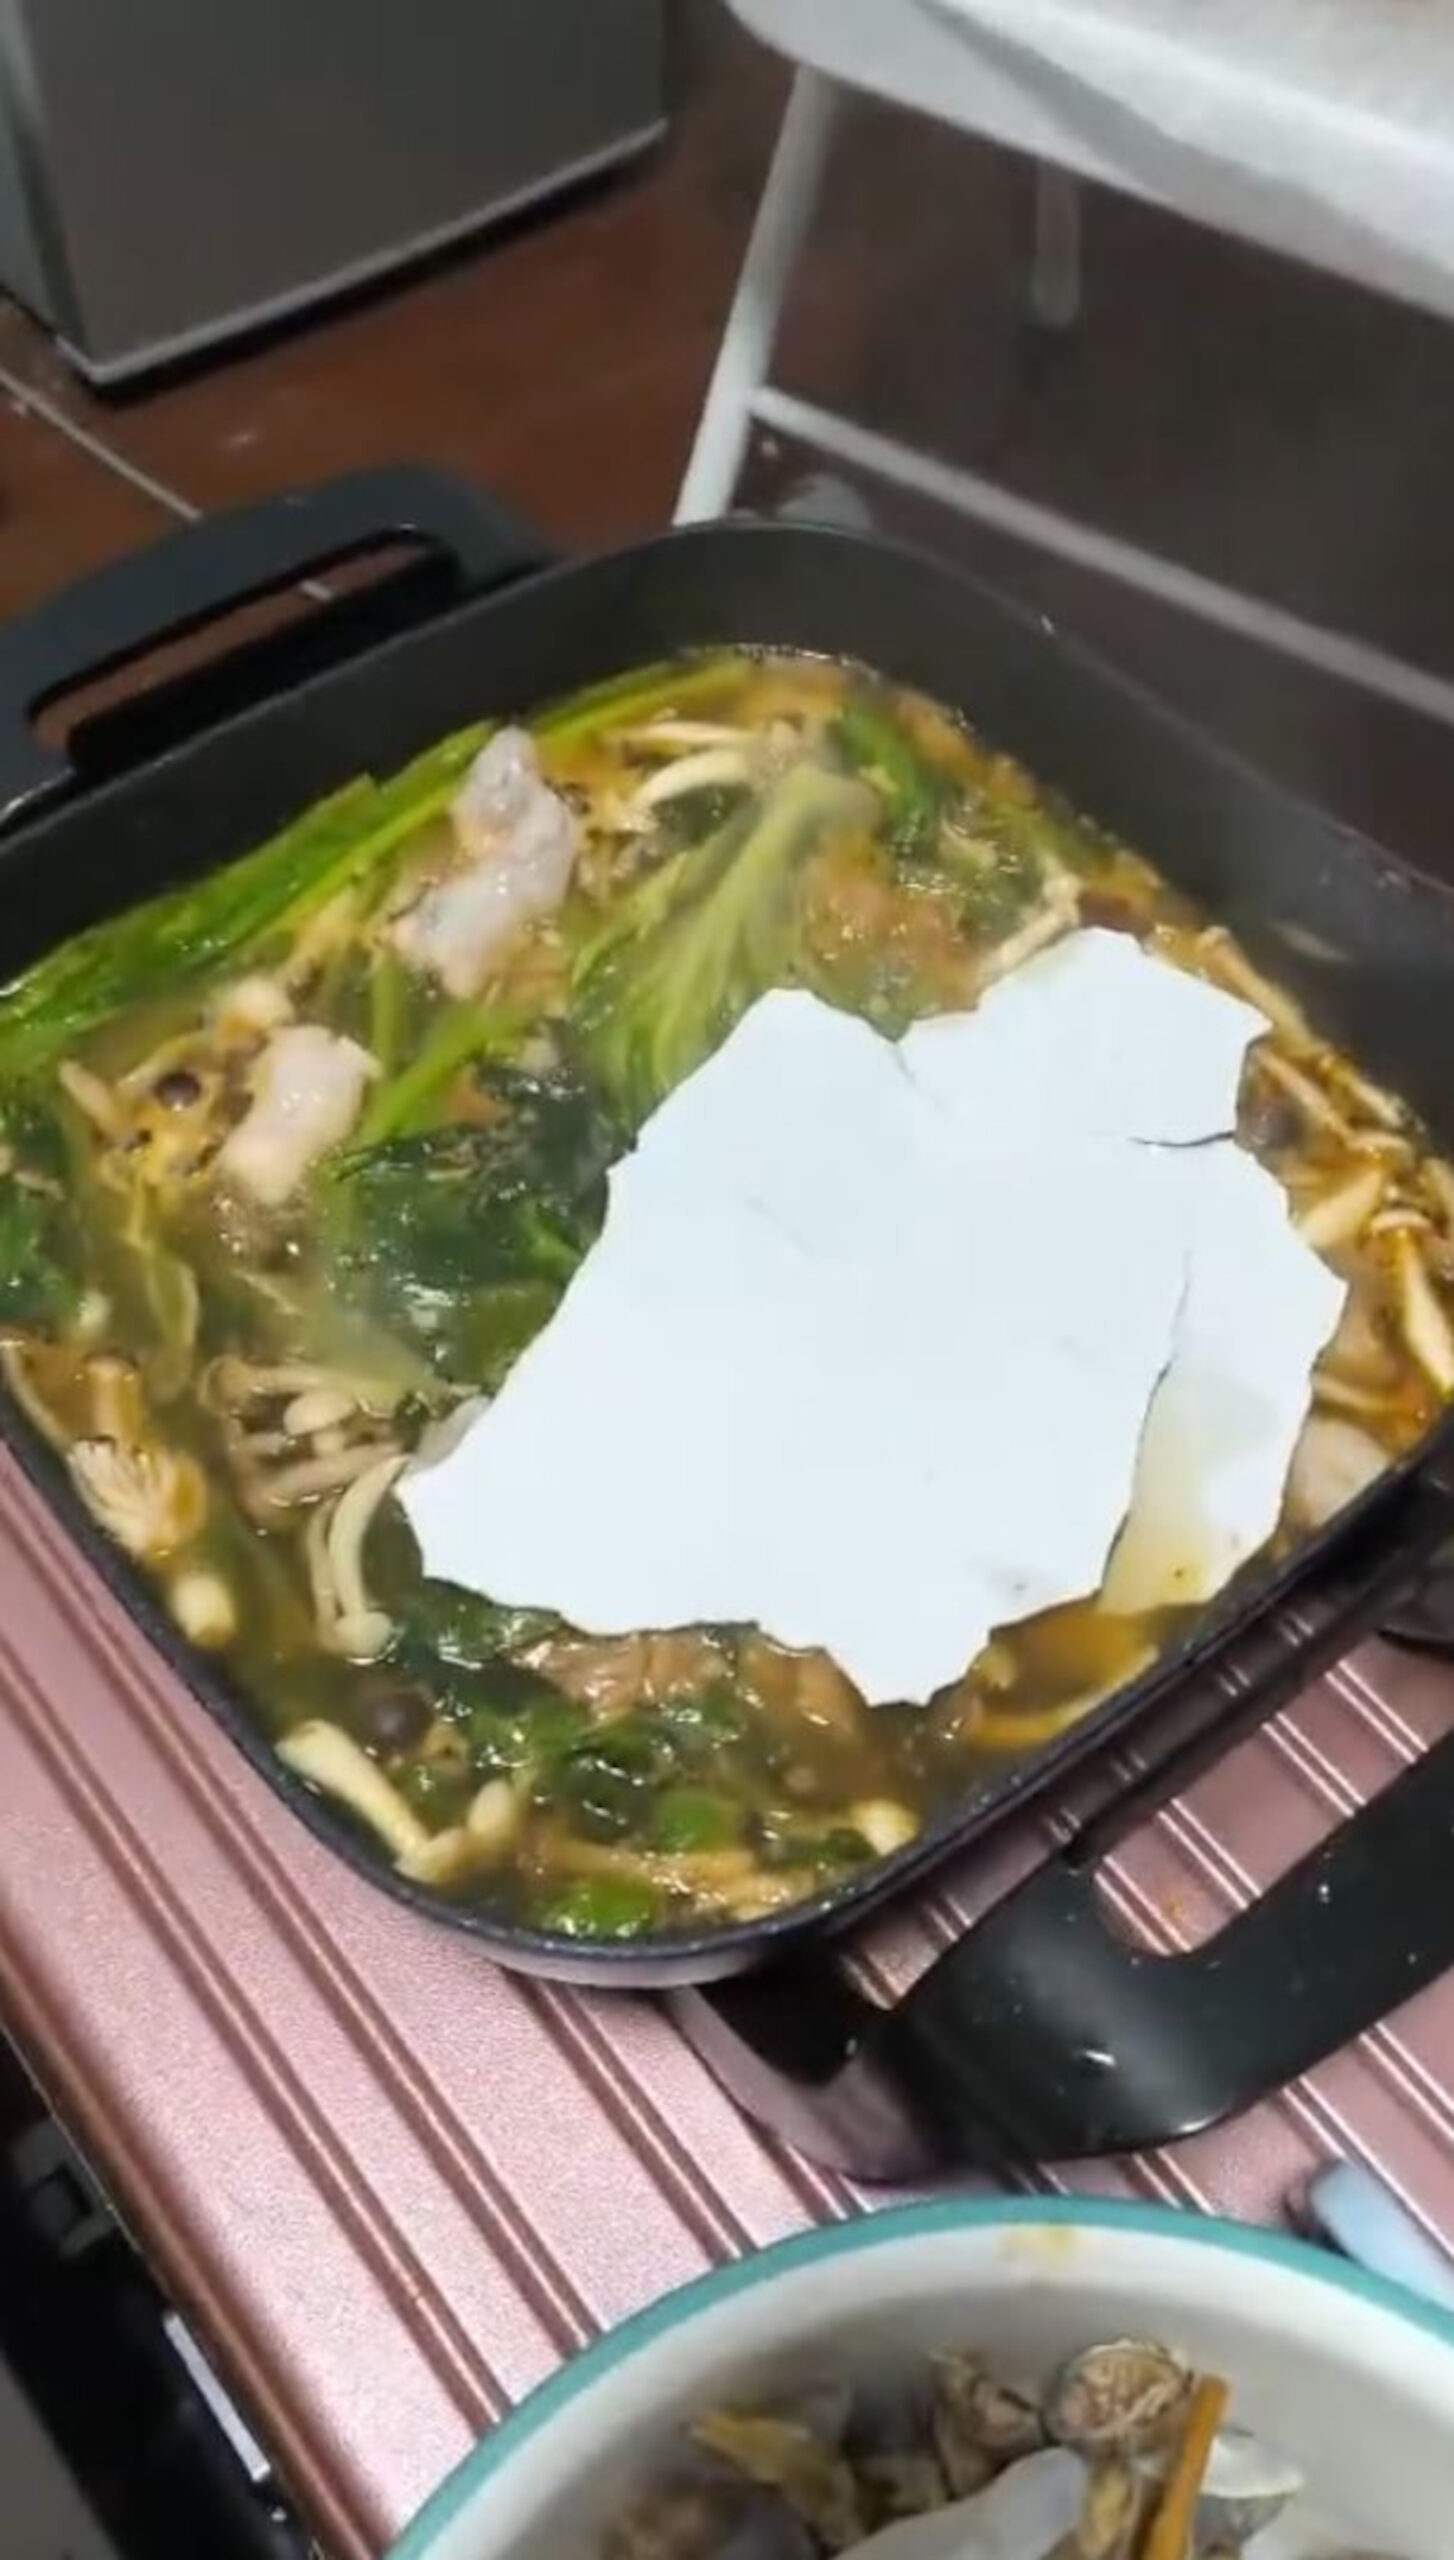 Read more about the article Man’s Evening Meal Ruined After Wall Plaster Falls From Ceiling Into Bowl Of Hot Pot